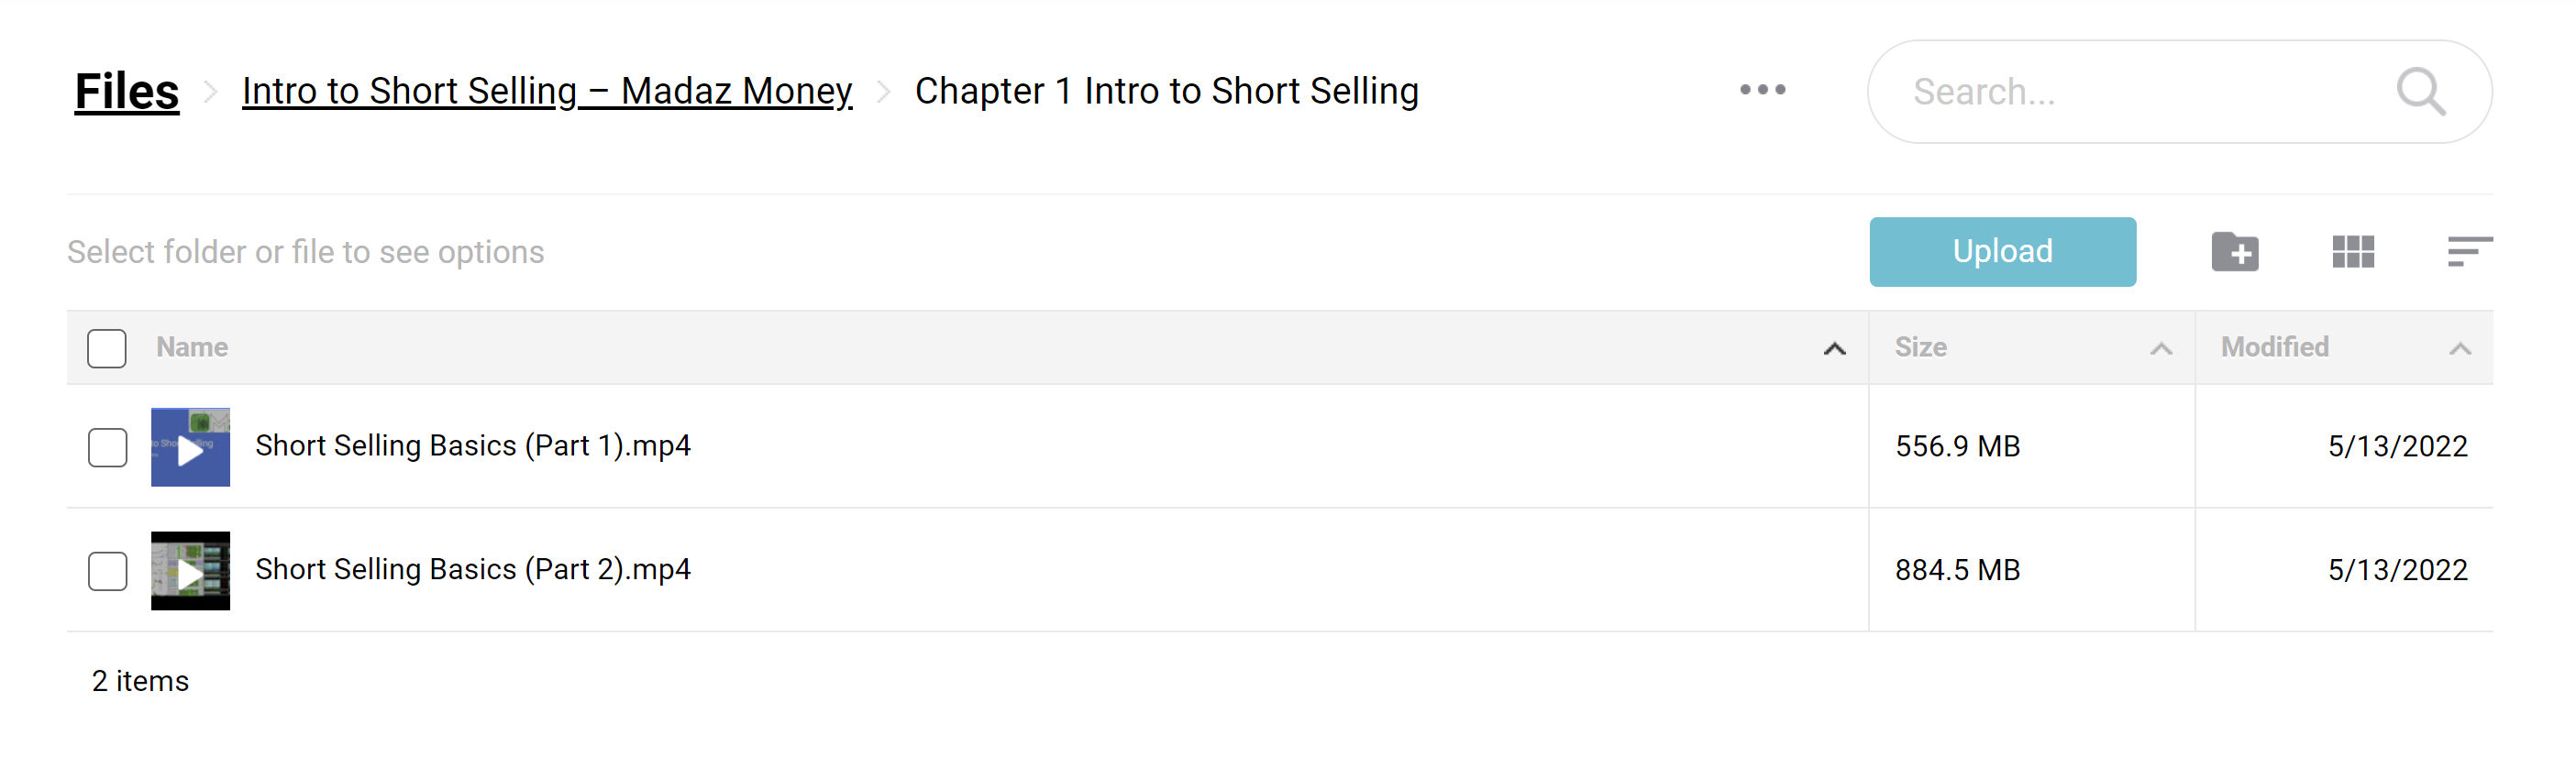 Madaz Money Intro To Short Selling Chapter 1